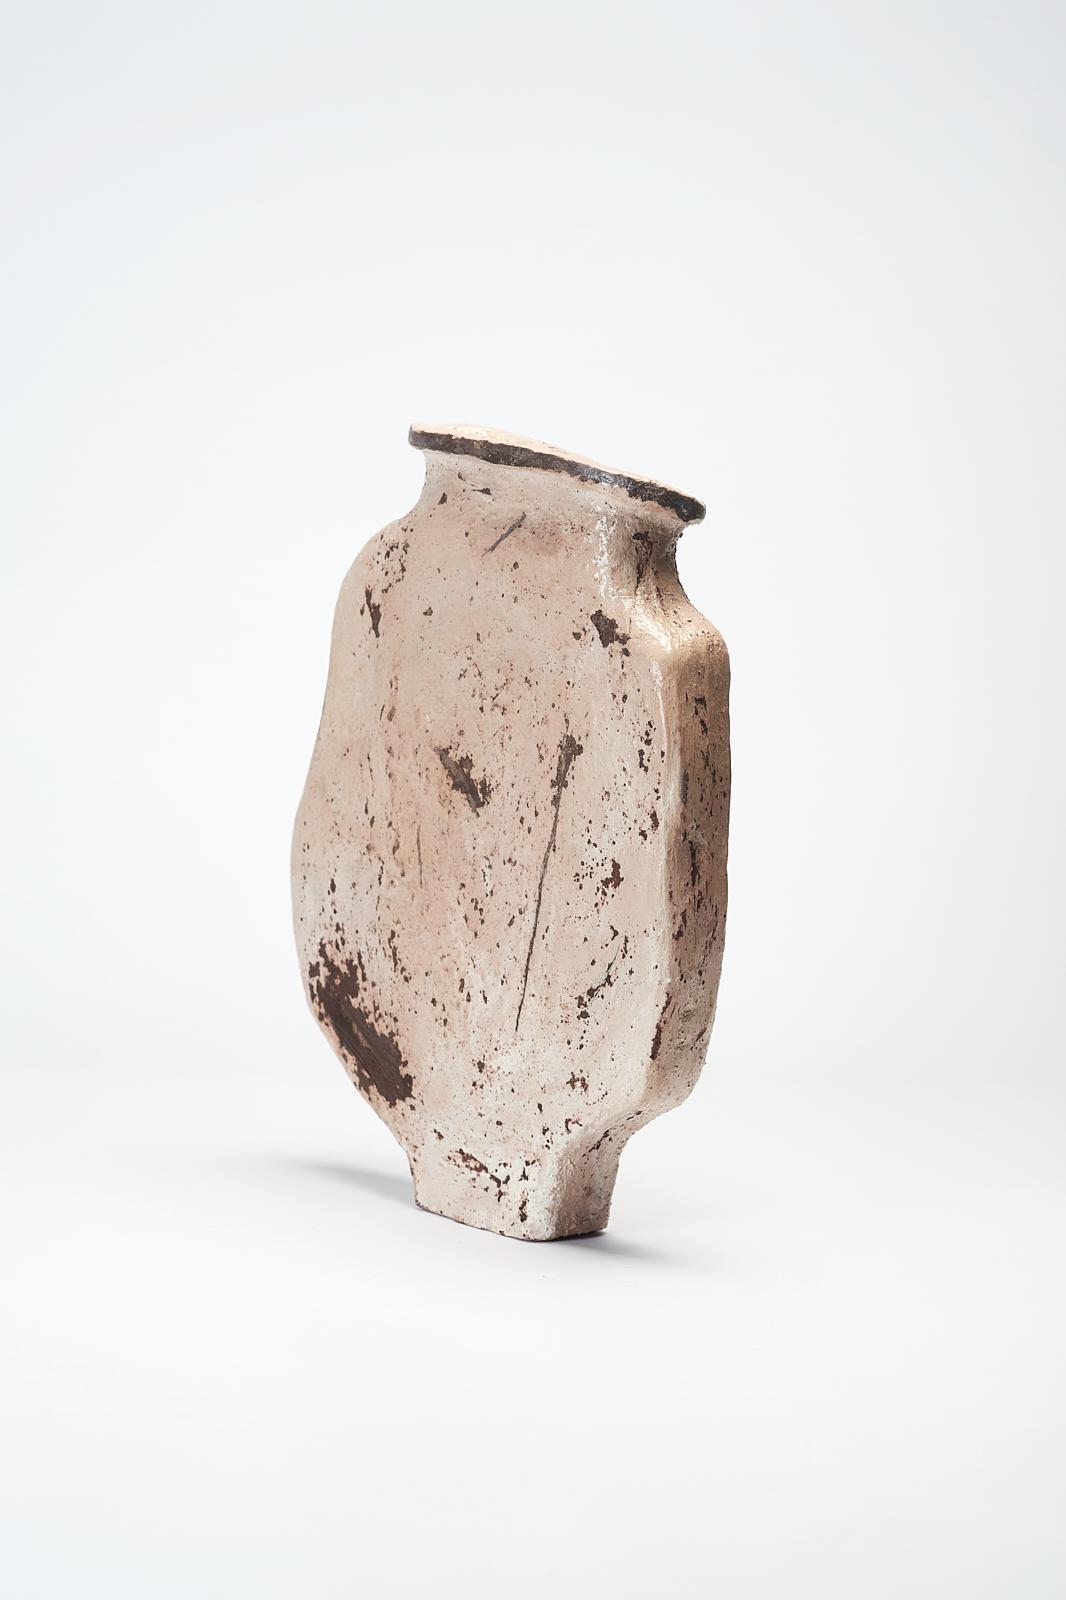 Veda Vase by Willem Van Hooff
Core Vessel series
Dimensions: W 29 x D 10 x H 37 cm (Dimensions may vary as pieces are hand-made and might present slight variations in sizes)
Materials: Earthenware, ceramic, pigments and glaze

Core is a series of